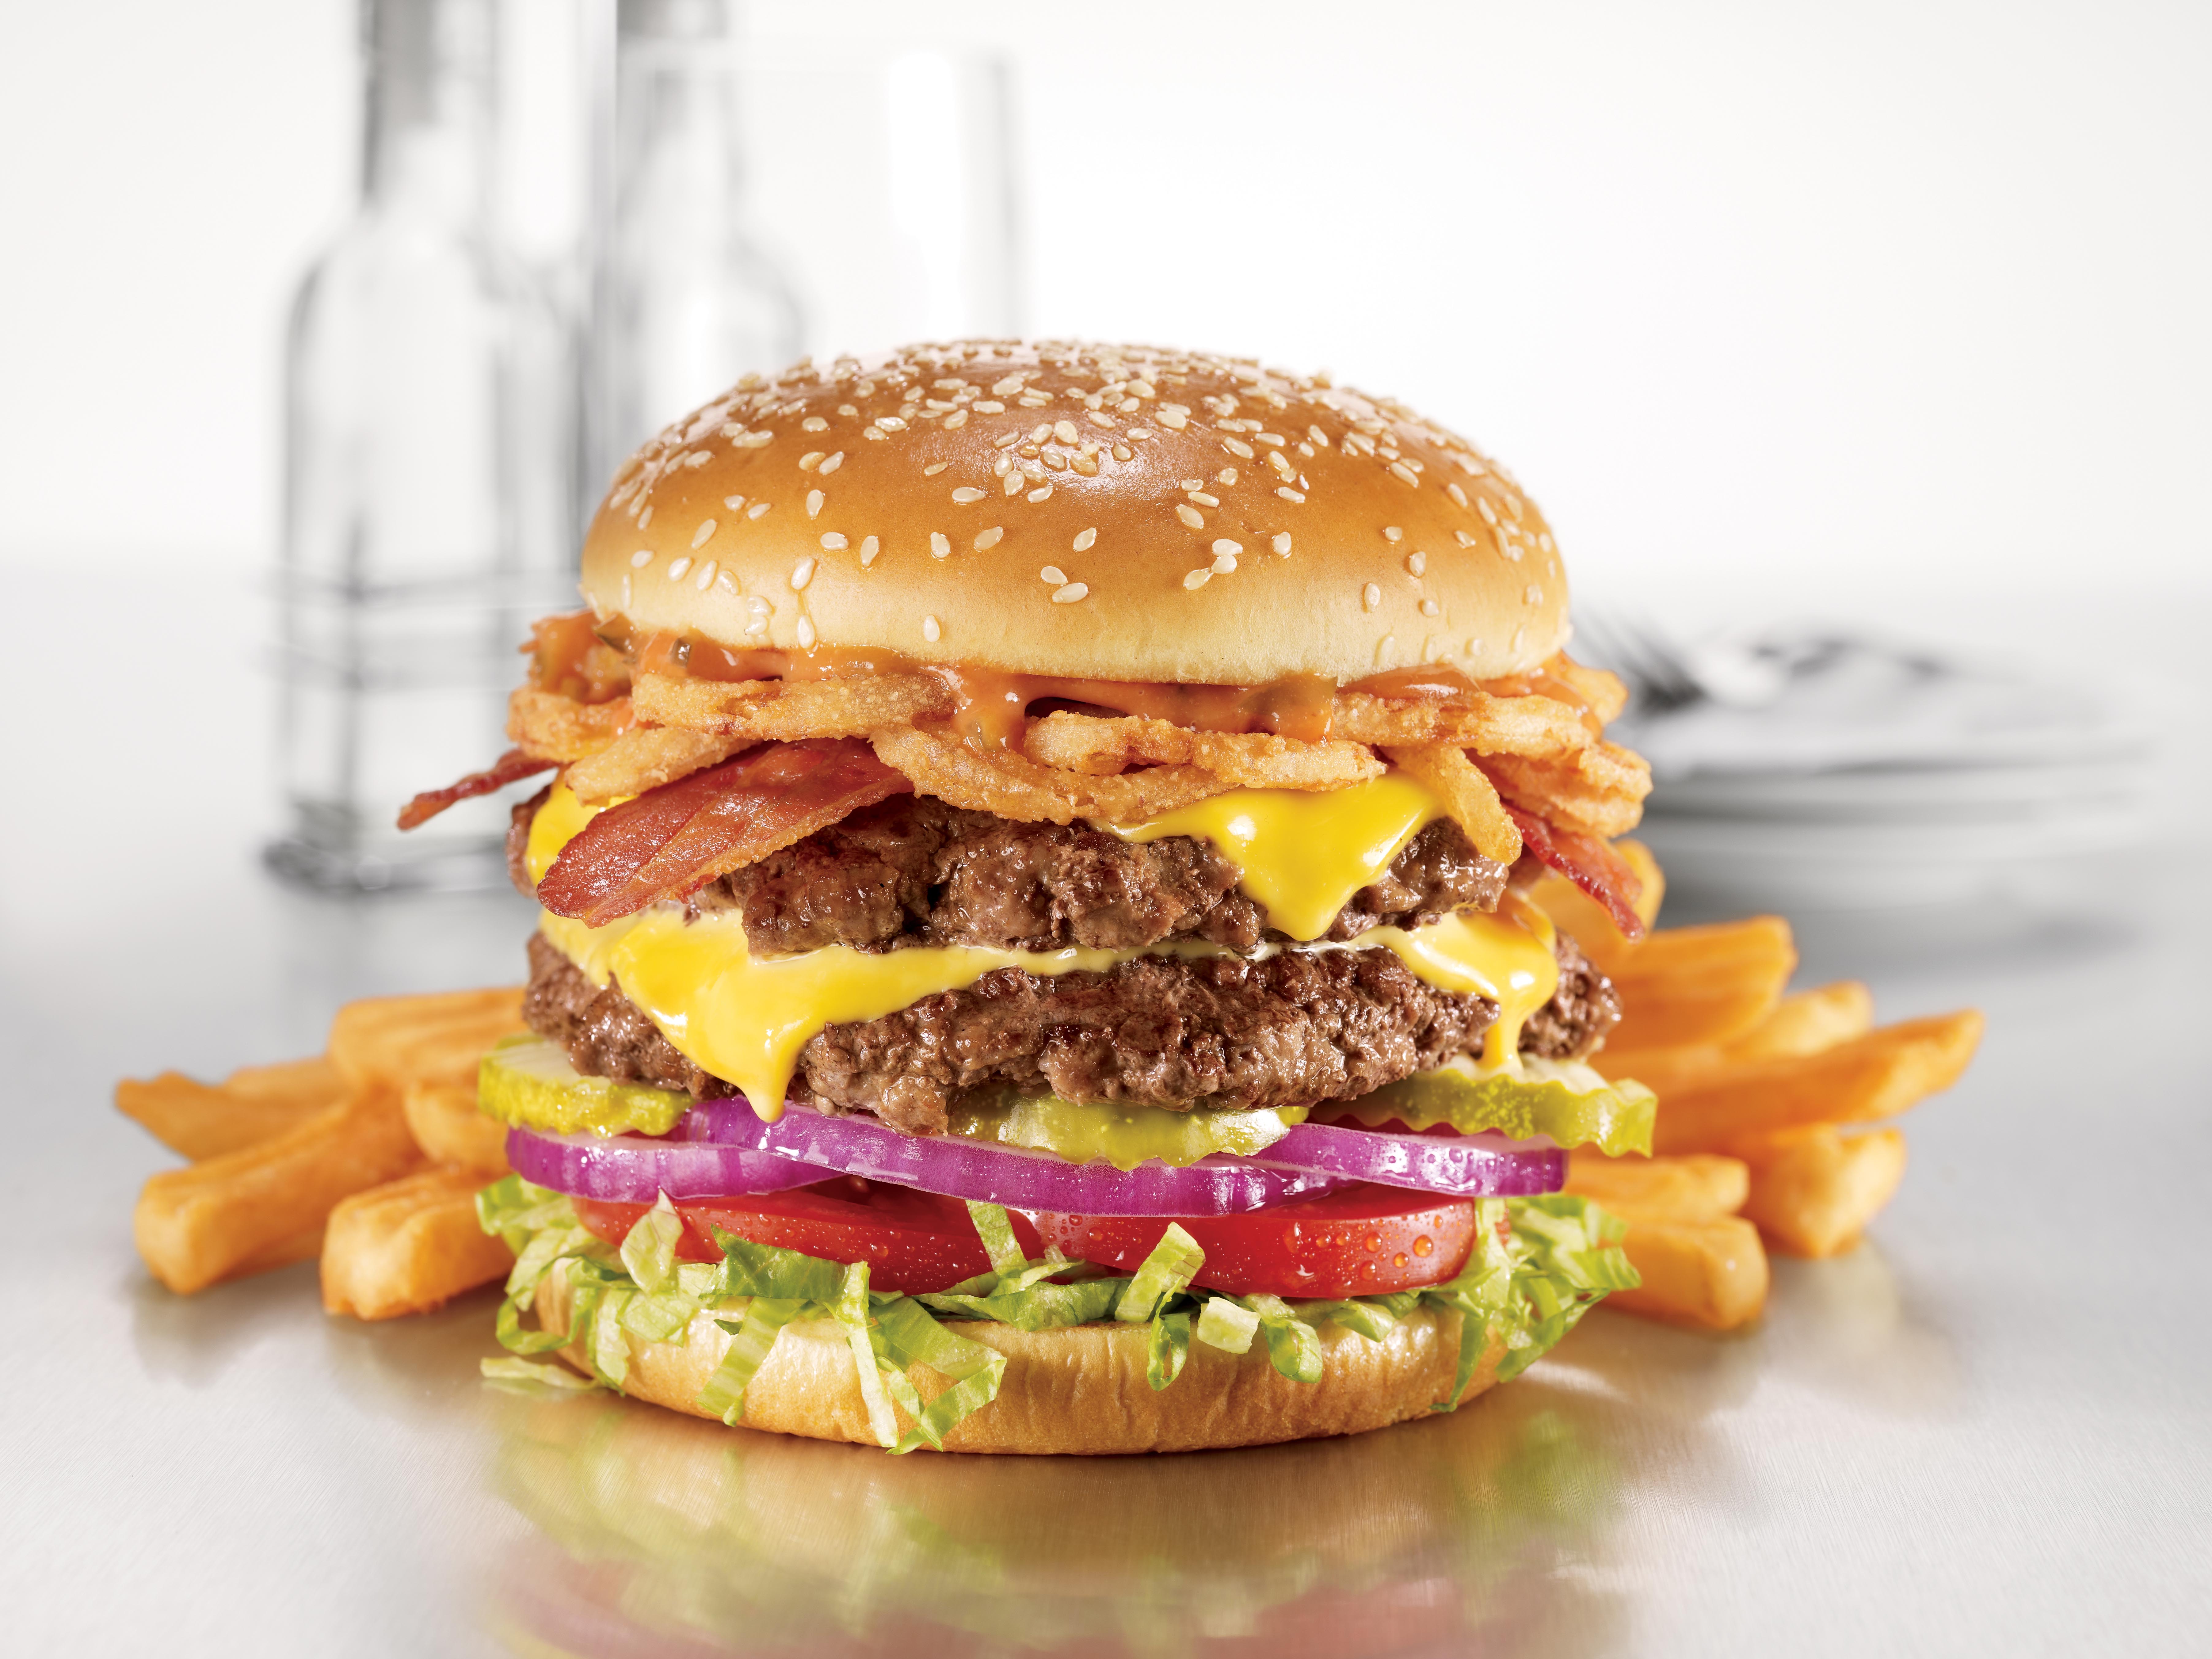 lidstrom:  pyreclaws:  masato-indou:  whittacker:  39 mega pixel photo of a burger    I can see the goddamn cell walls in the onion holy fucking shit   